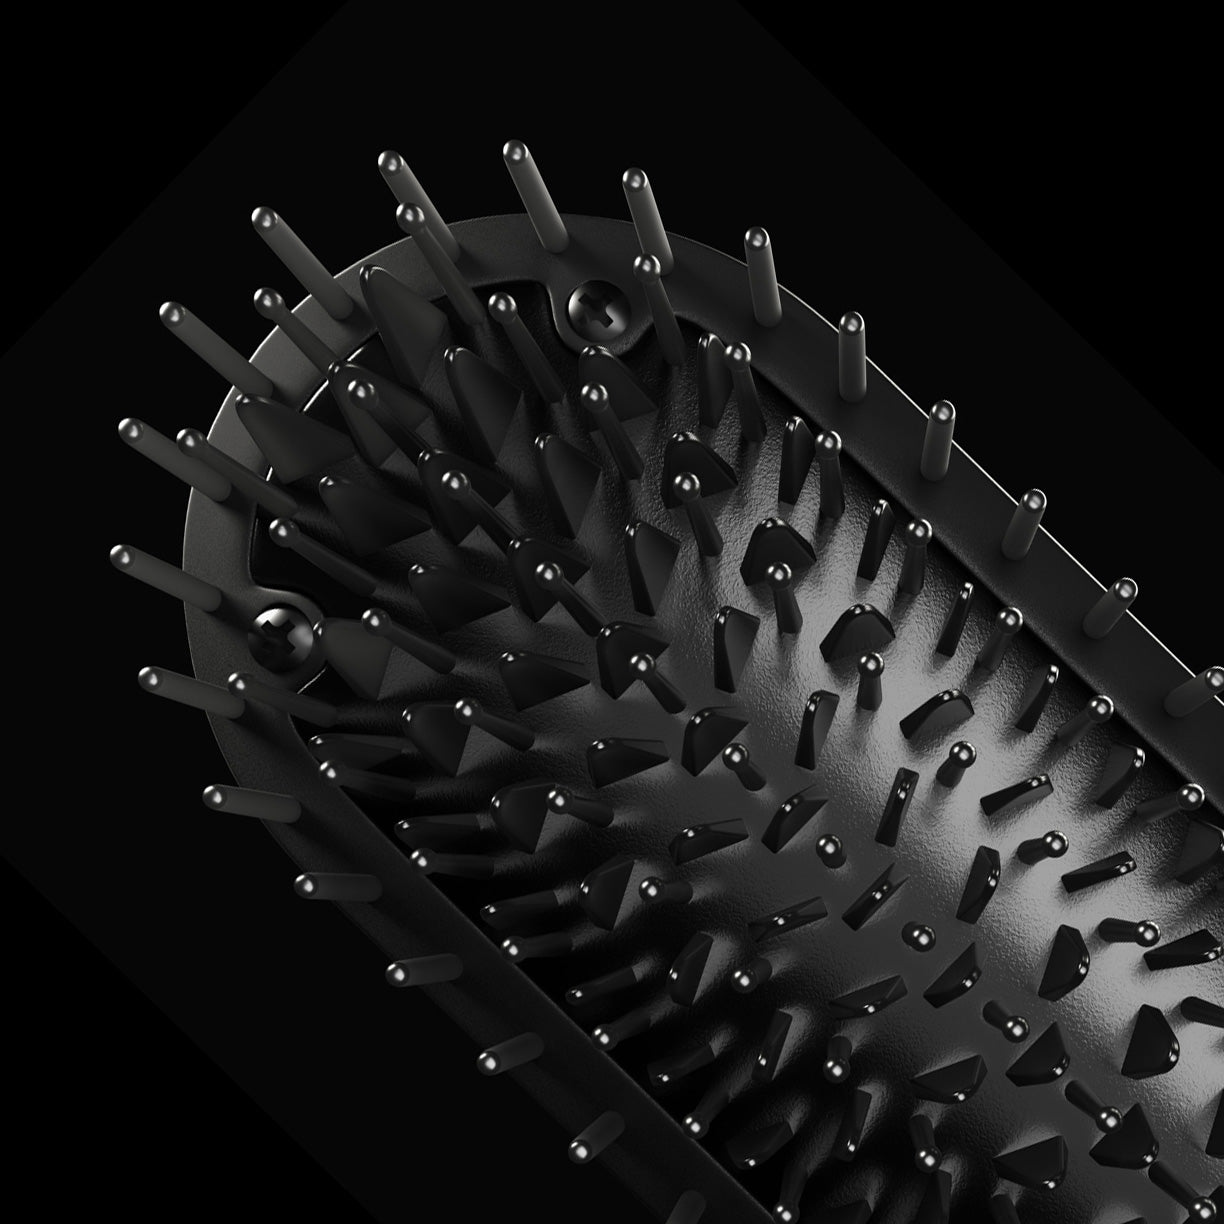 A zoomed in image of the bristles on the black CLOUD NINE Original Hot Brush.